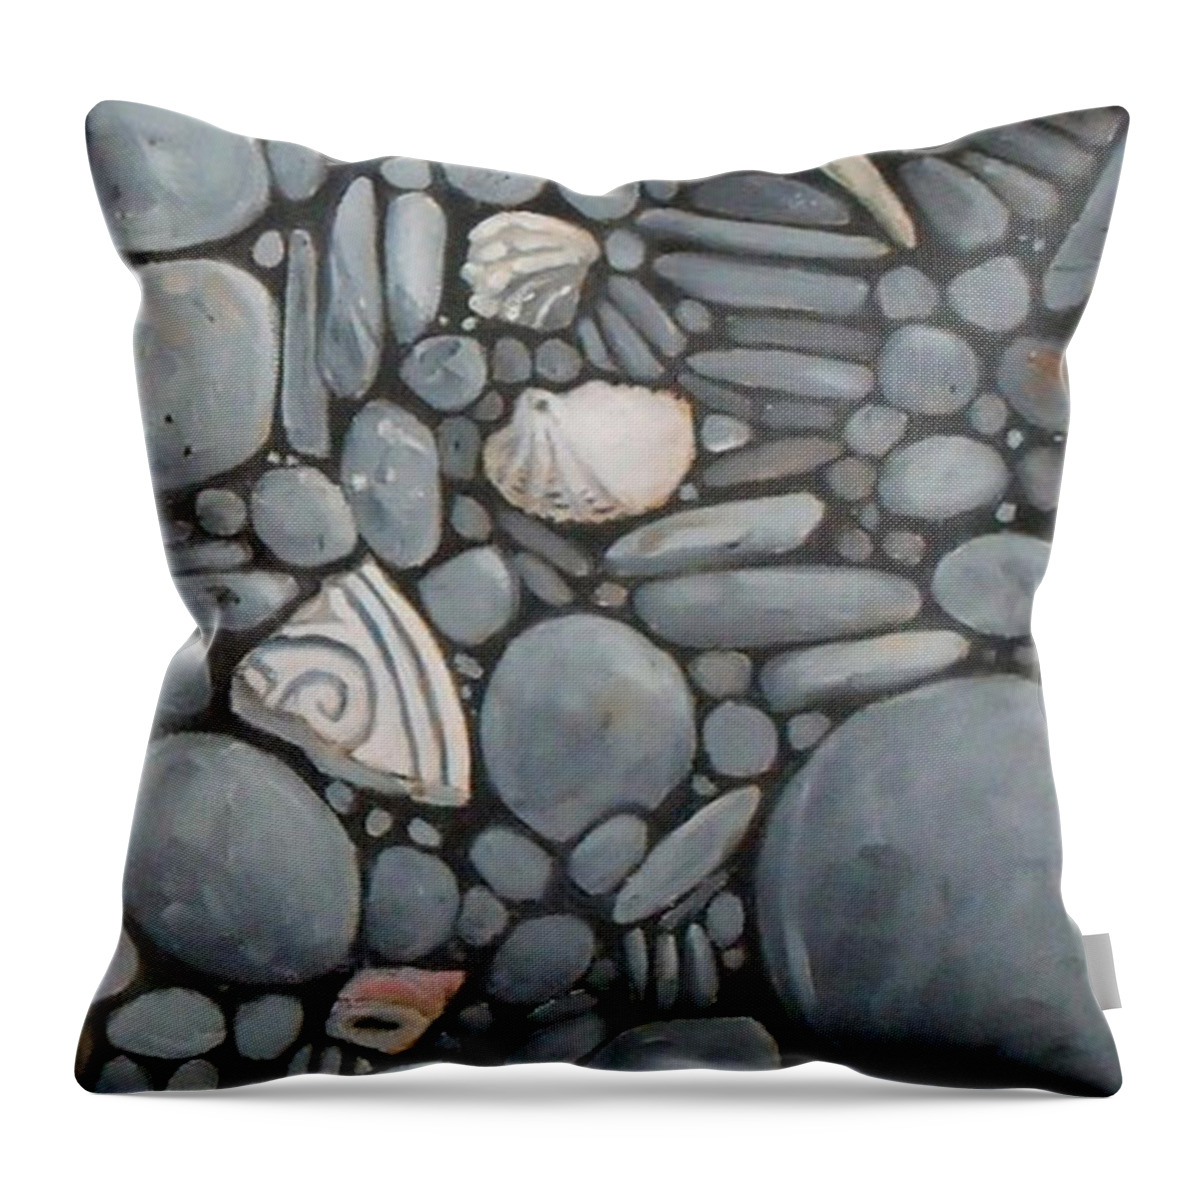 Stones Throw Pillow featuring the painting Stone Beach Keepsake Rocky Beach Shells and Stones by Mary Hubley